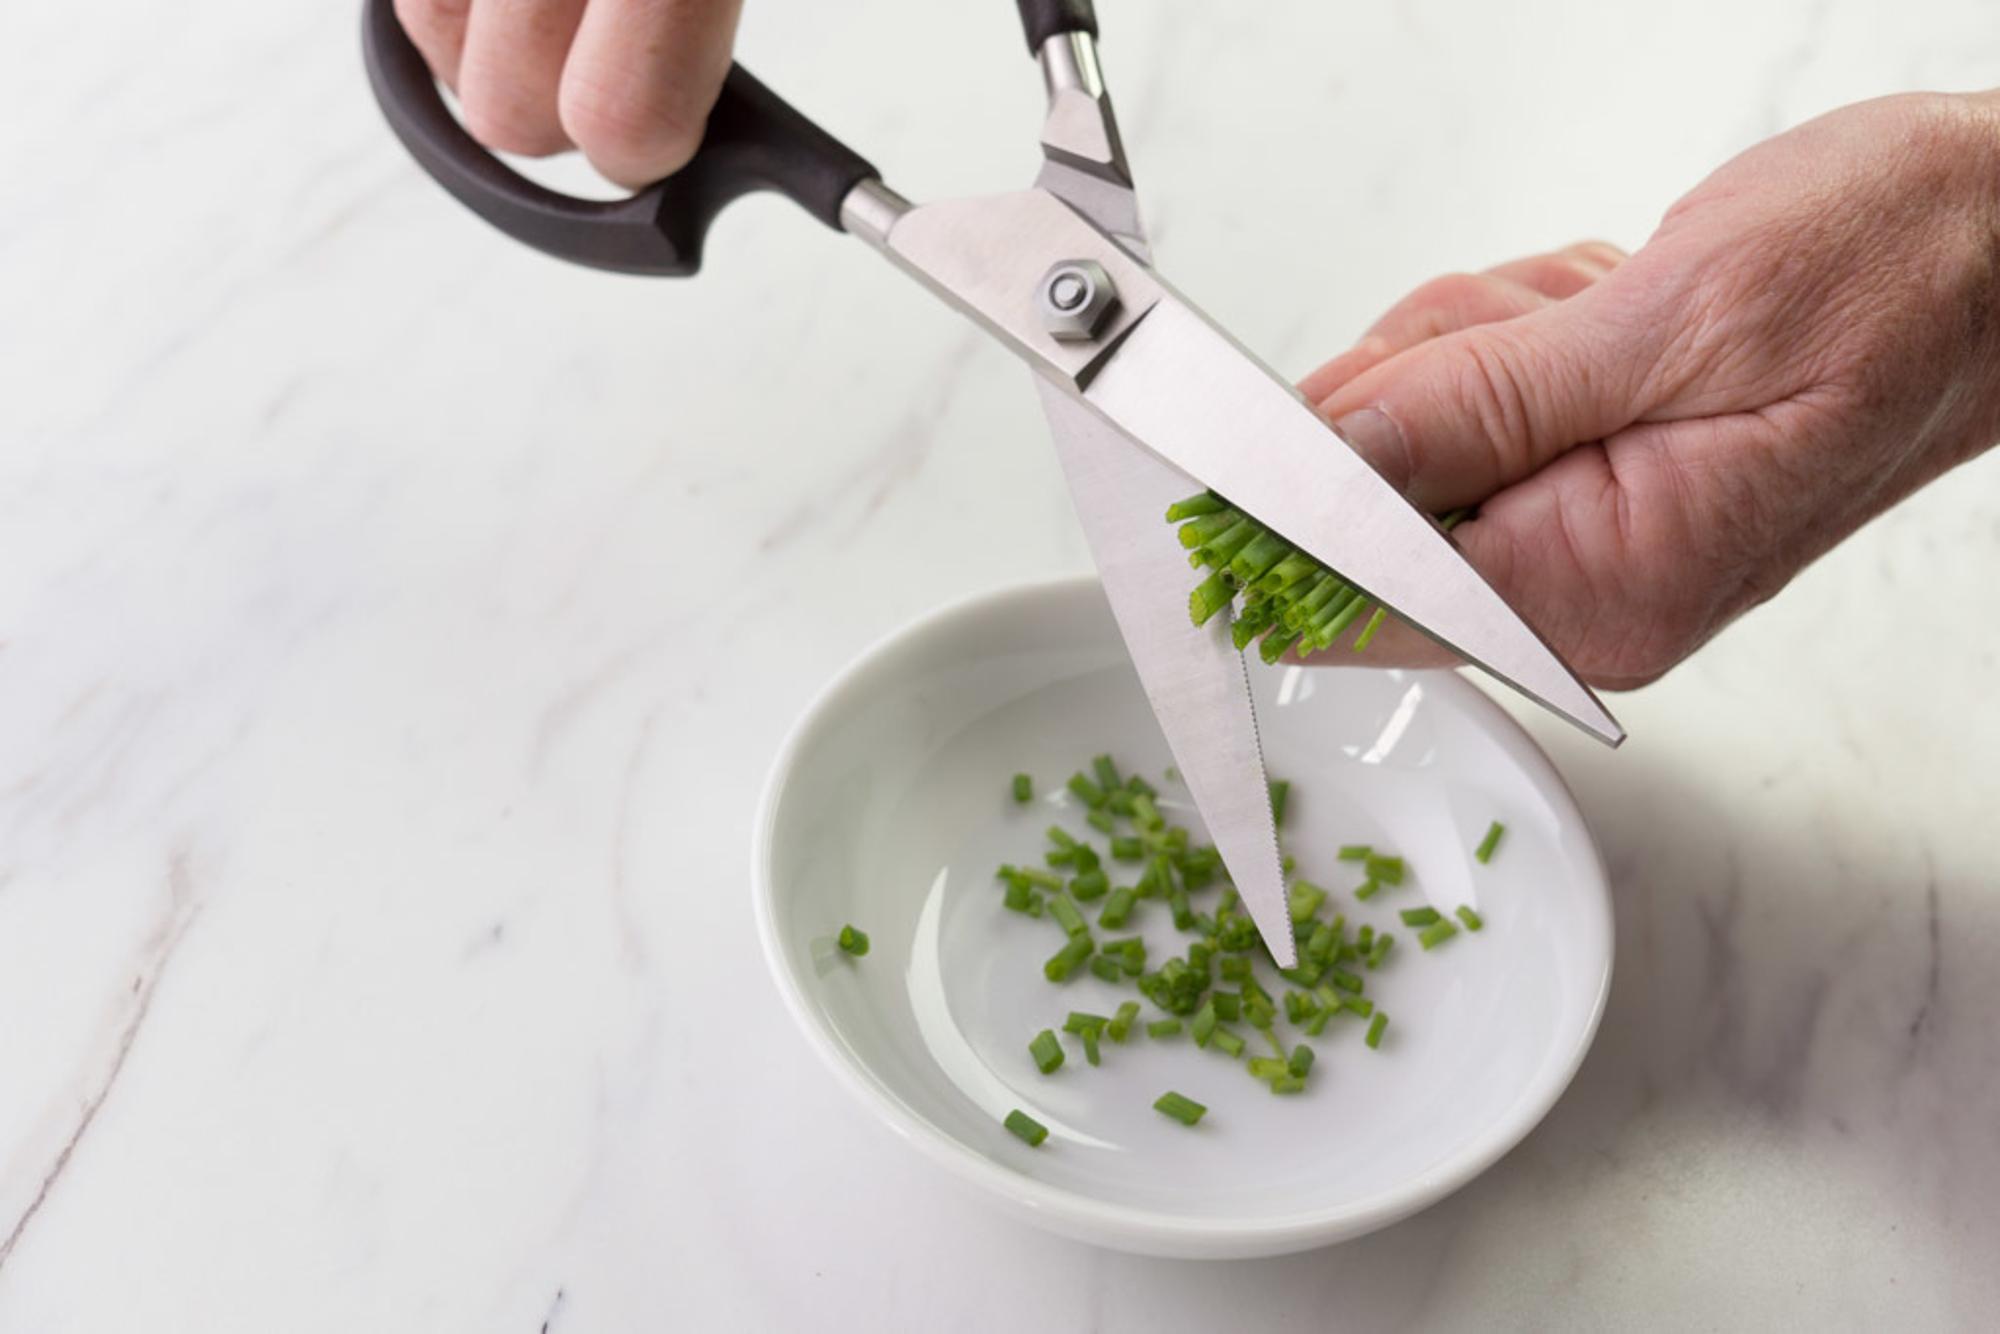 Super Shears being used to snip the chives.